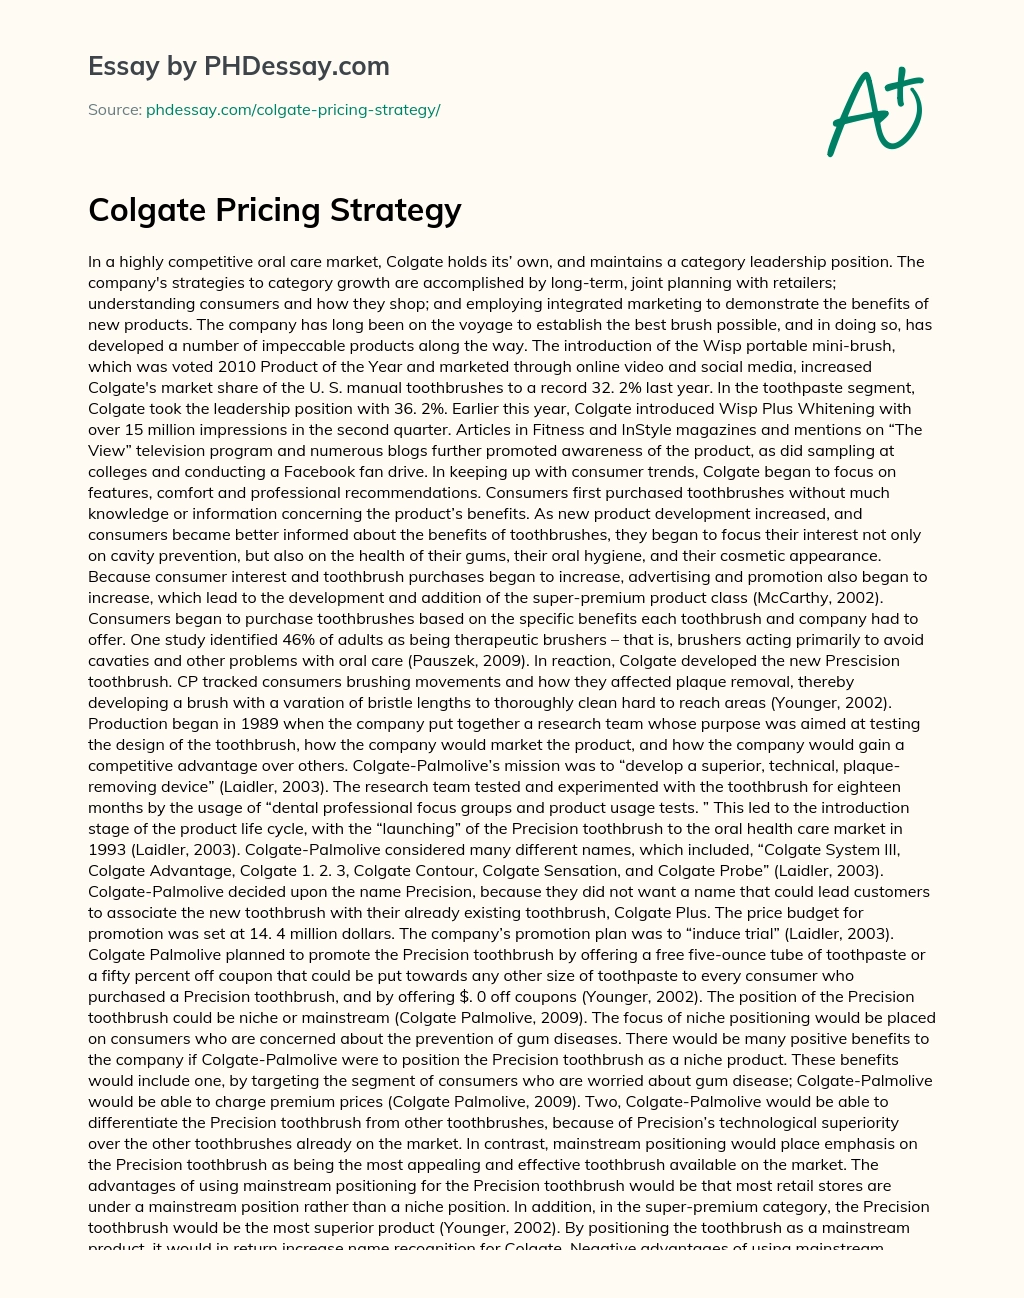 Colgate Pricing Strategy essay